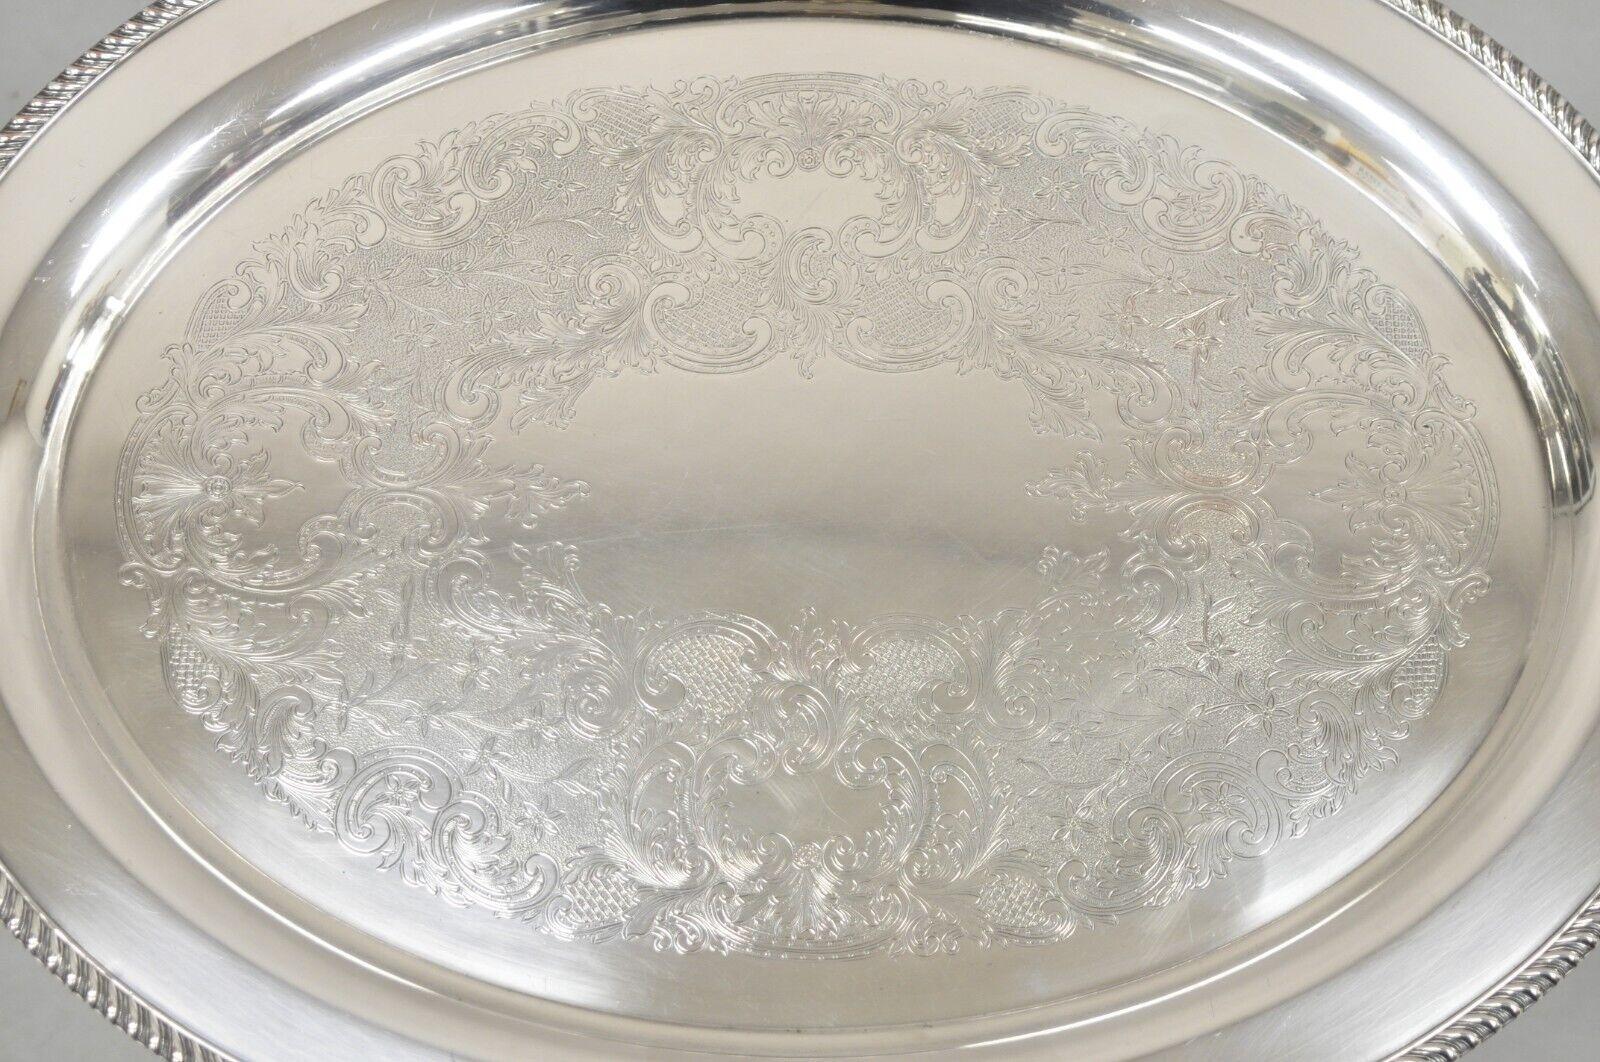 Vintage English Victorian Large Oval Silver Plated Serving Platter Tray by Victoria. Circa Early 20th Century. Measurements:  2